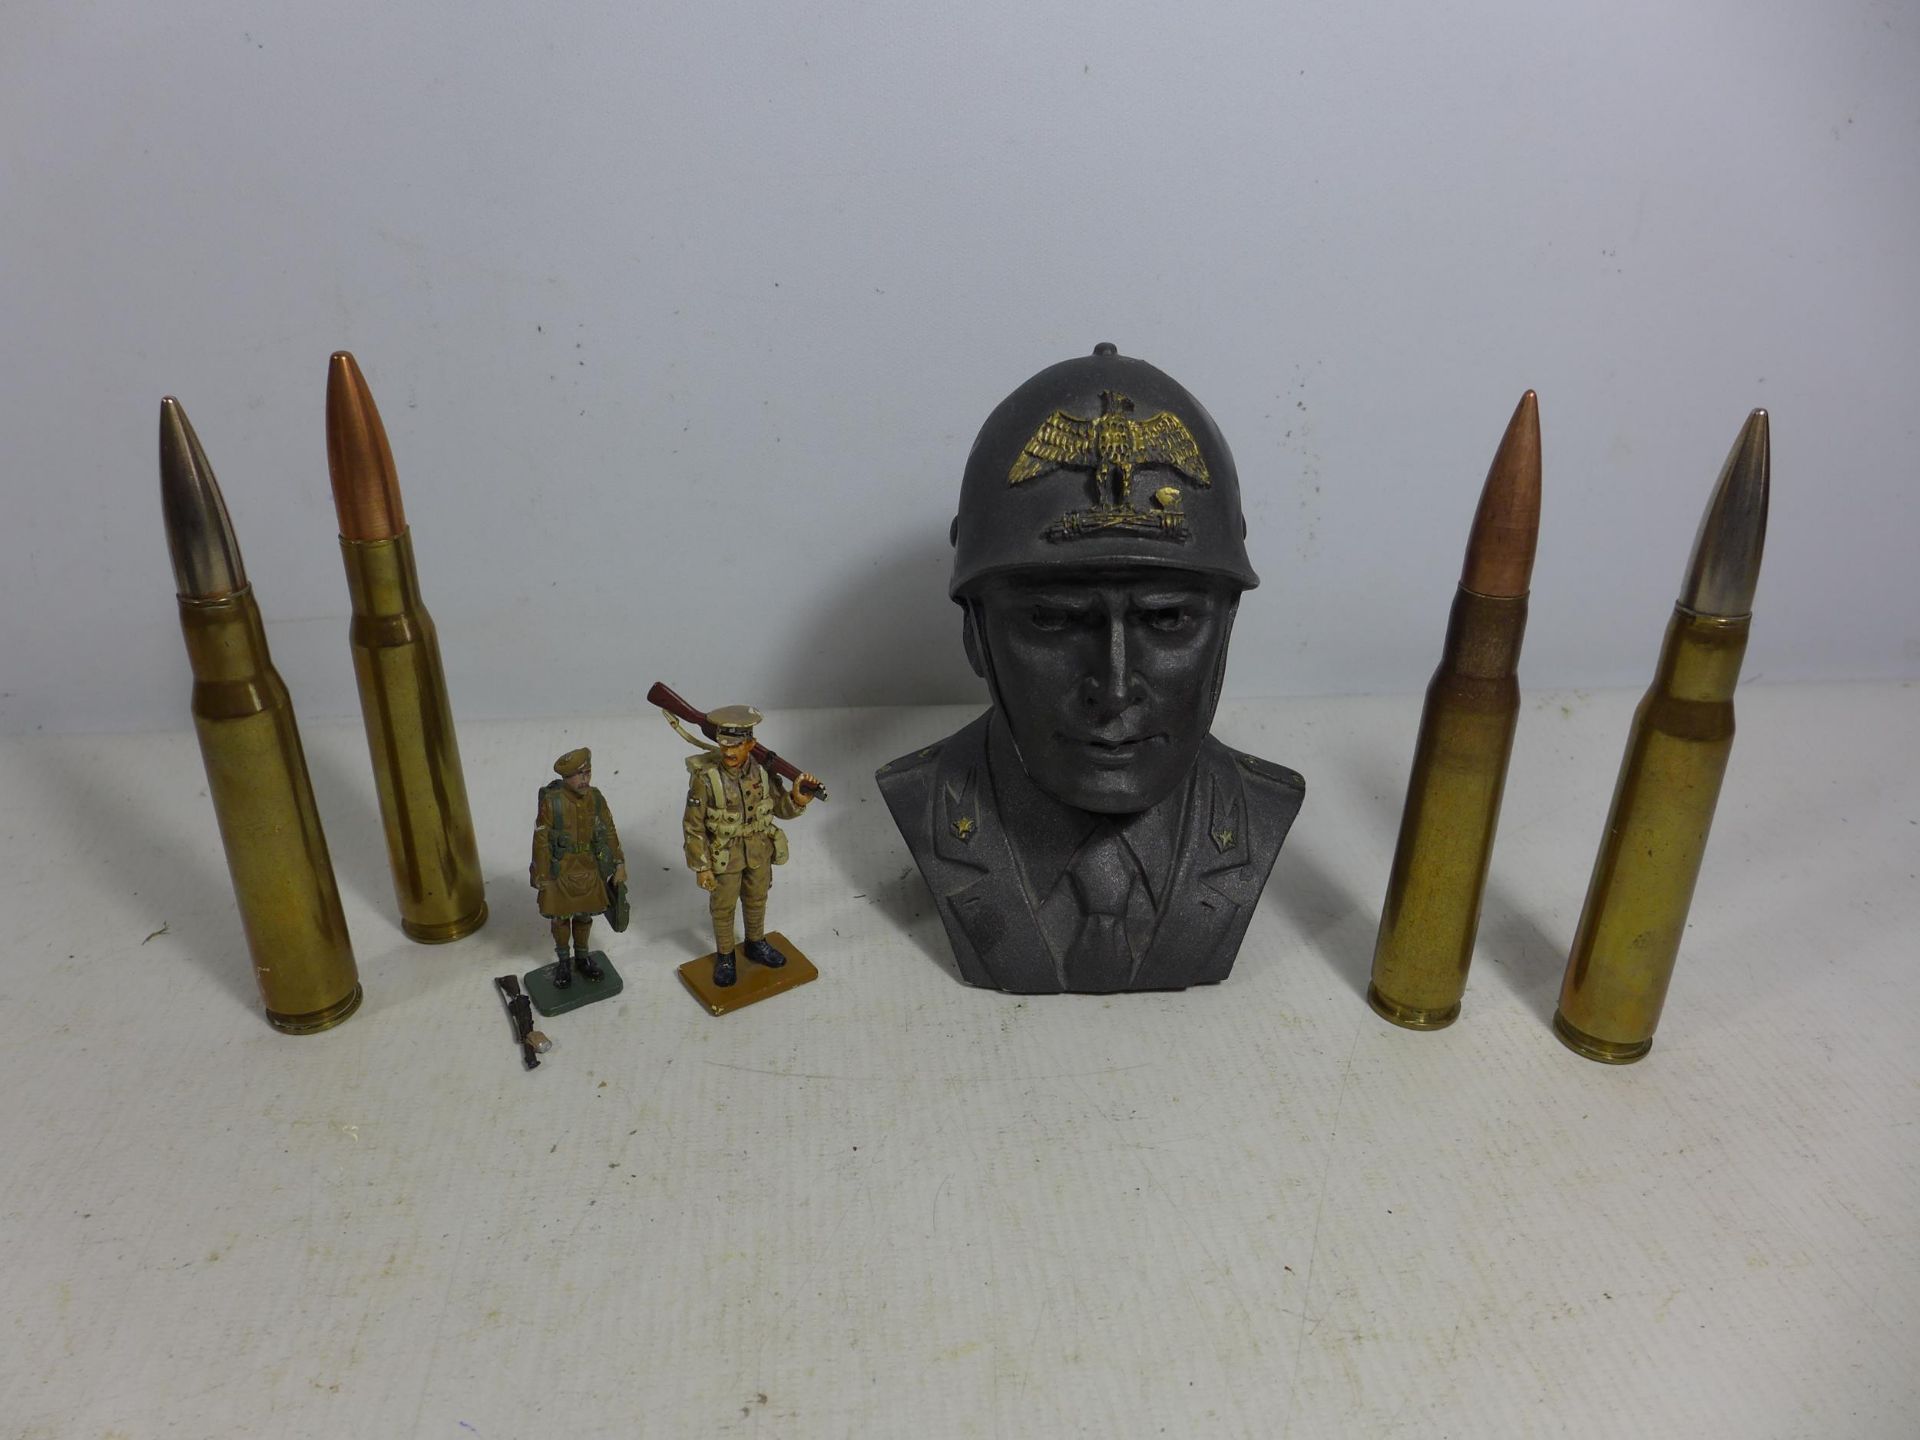 FOUR INERT CANNON SHELLS, TWO MODEL SOLDIERS AND A BUST OF AN ITALIAN SOLDIER